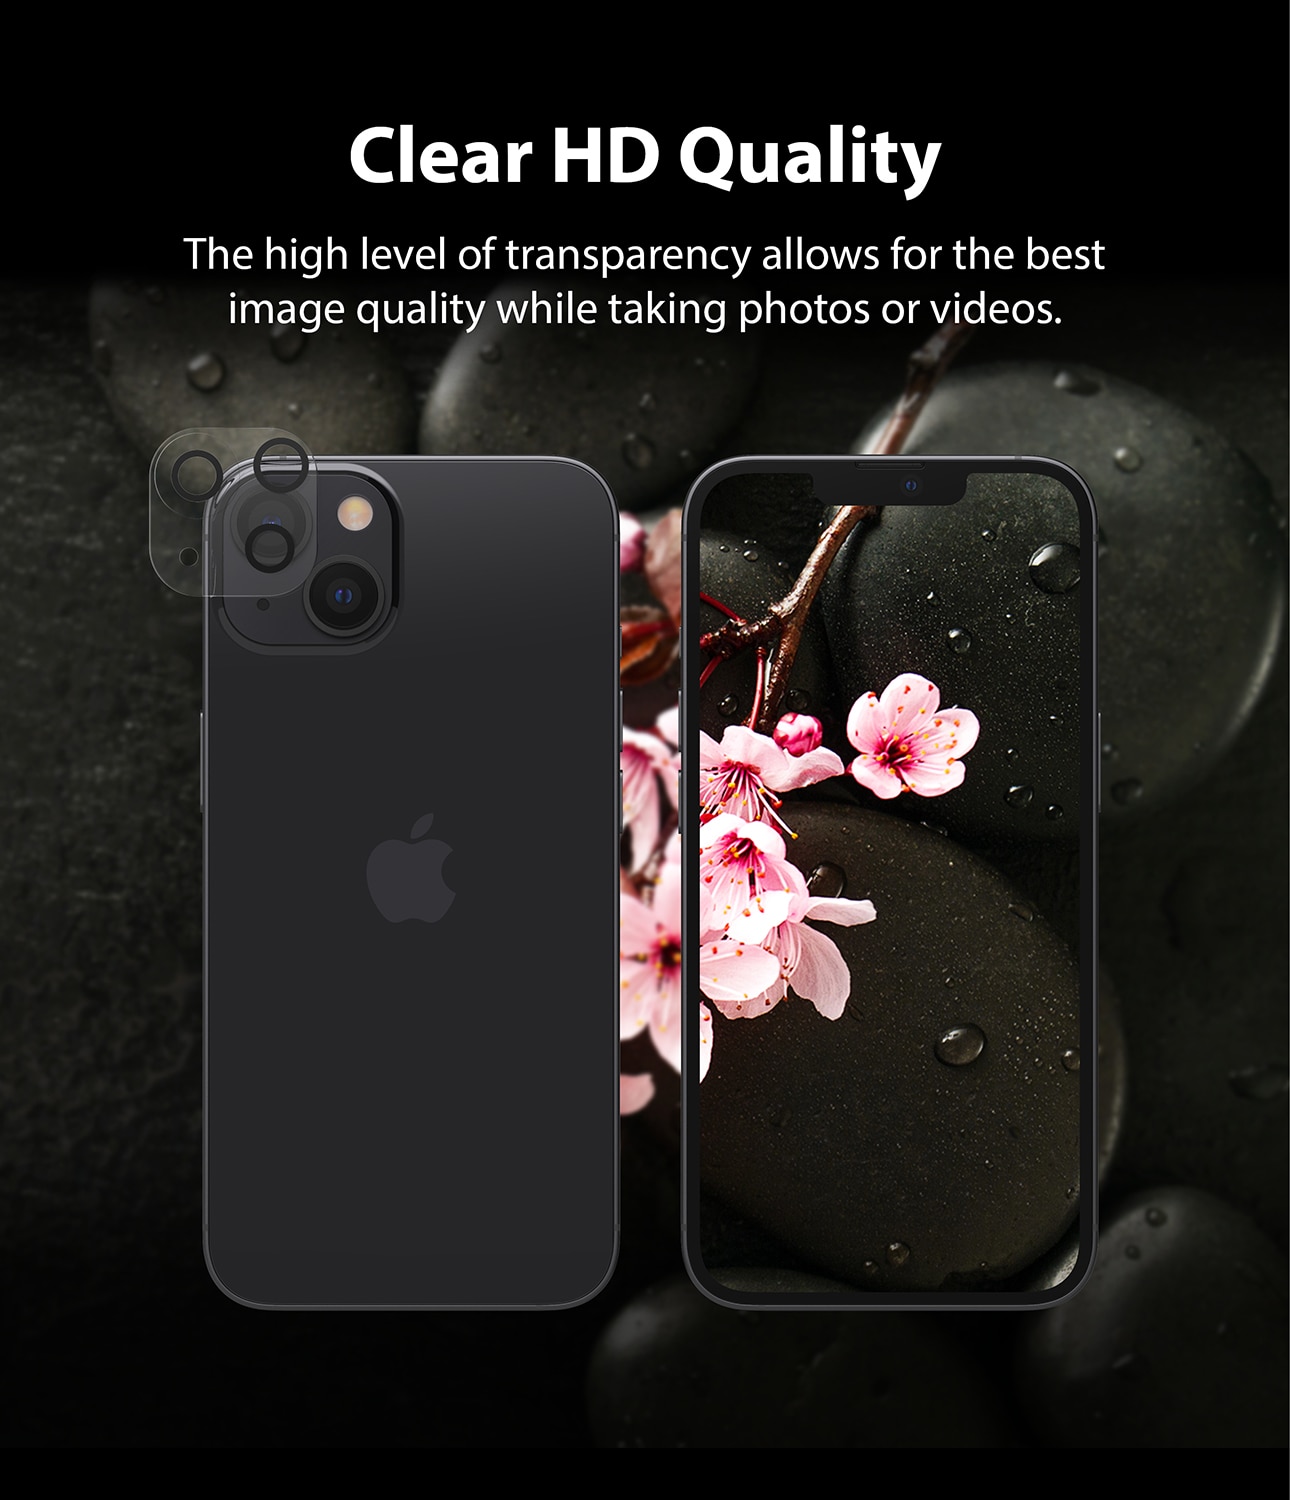 iPhone 13 Camera Protector Glass (2-pack)